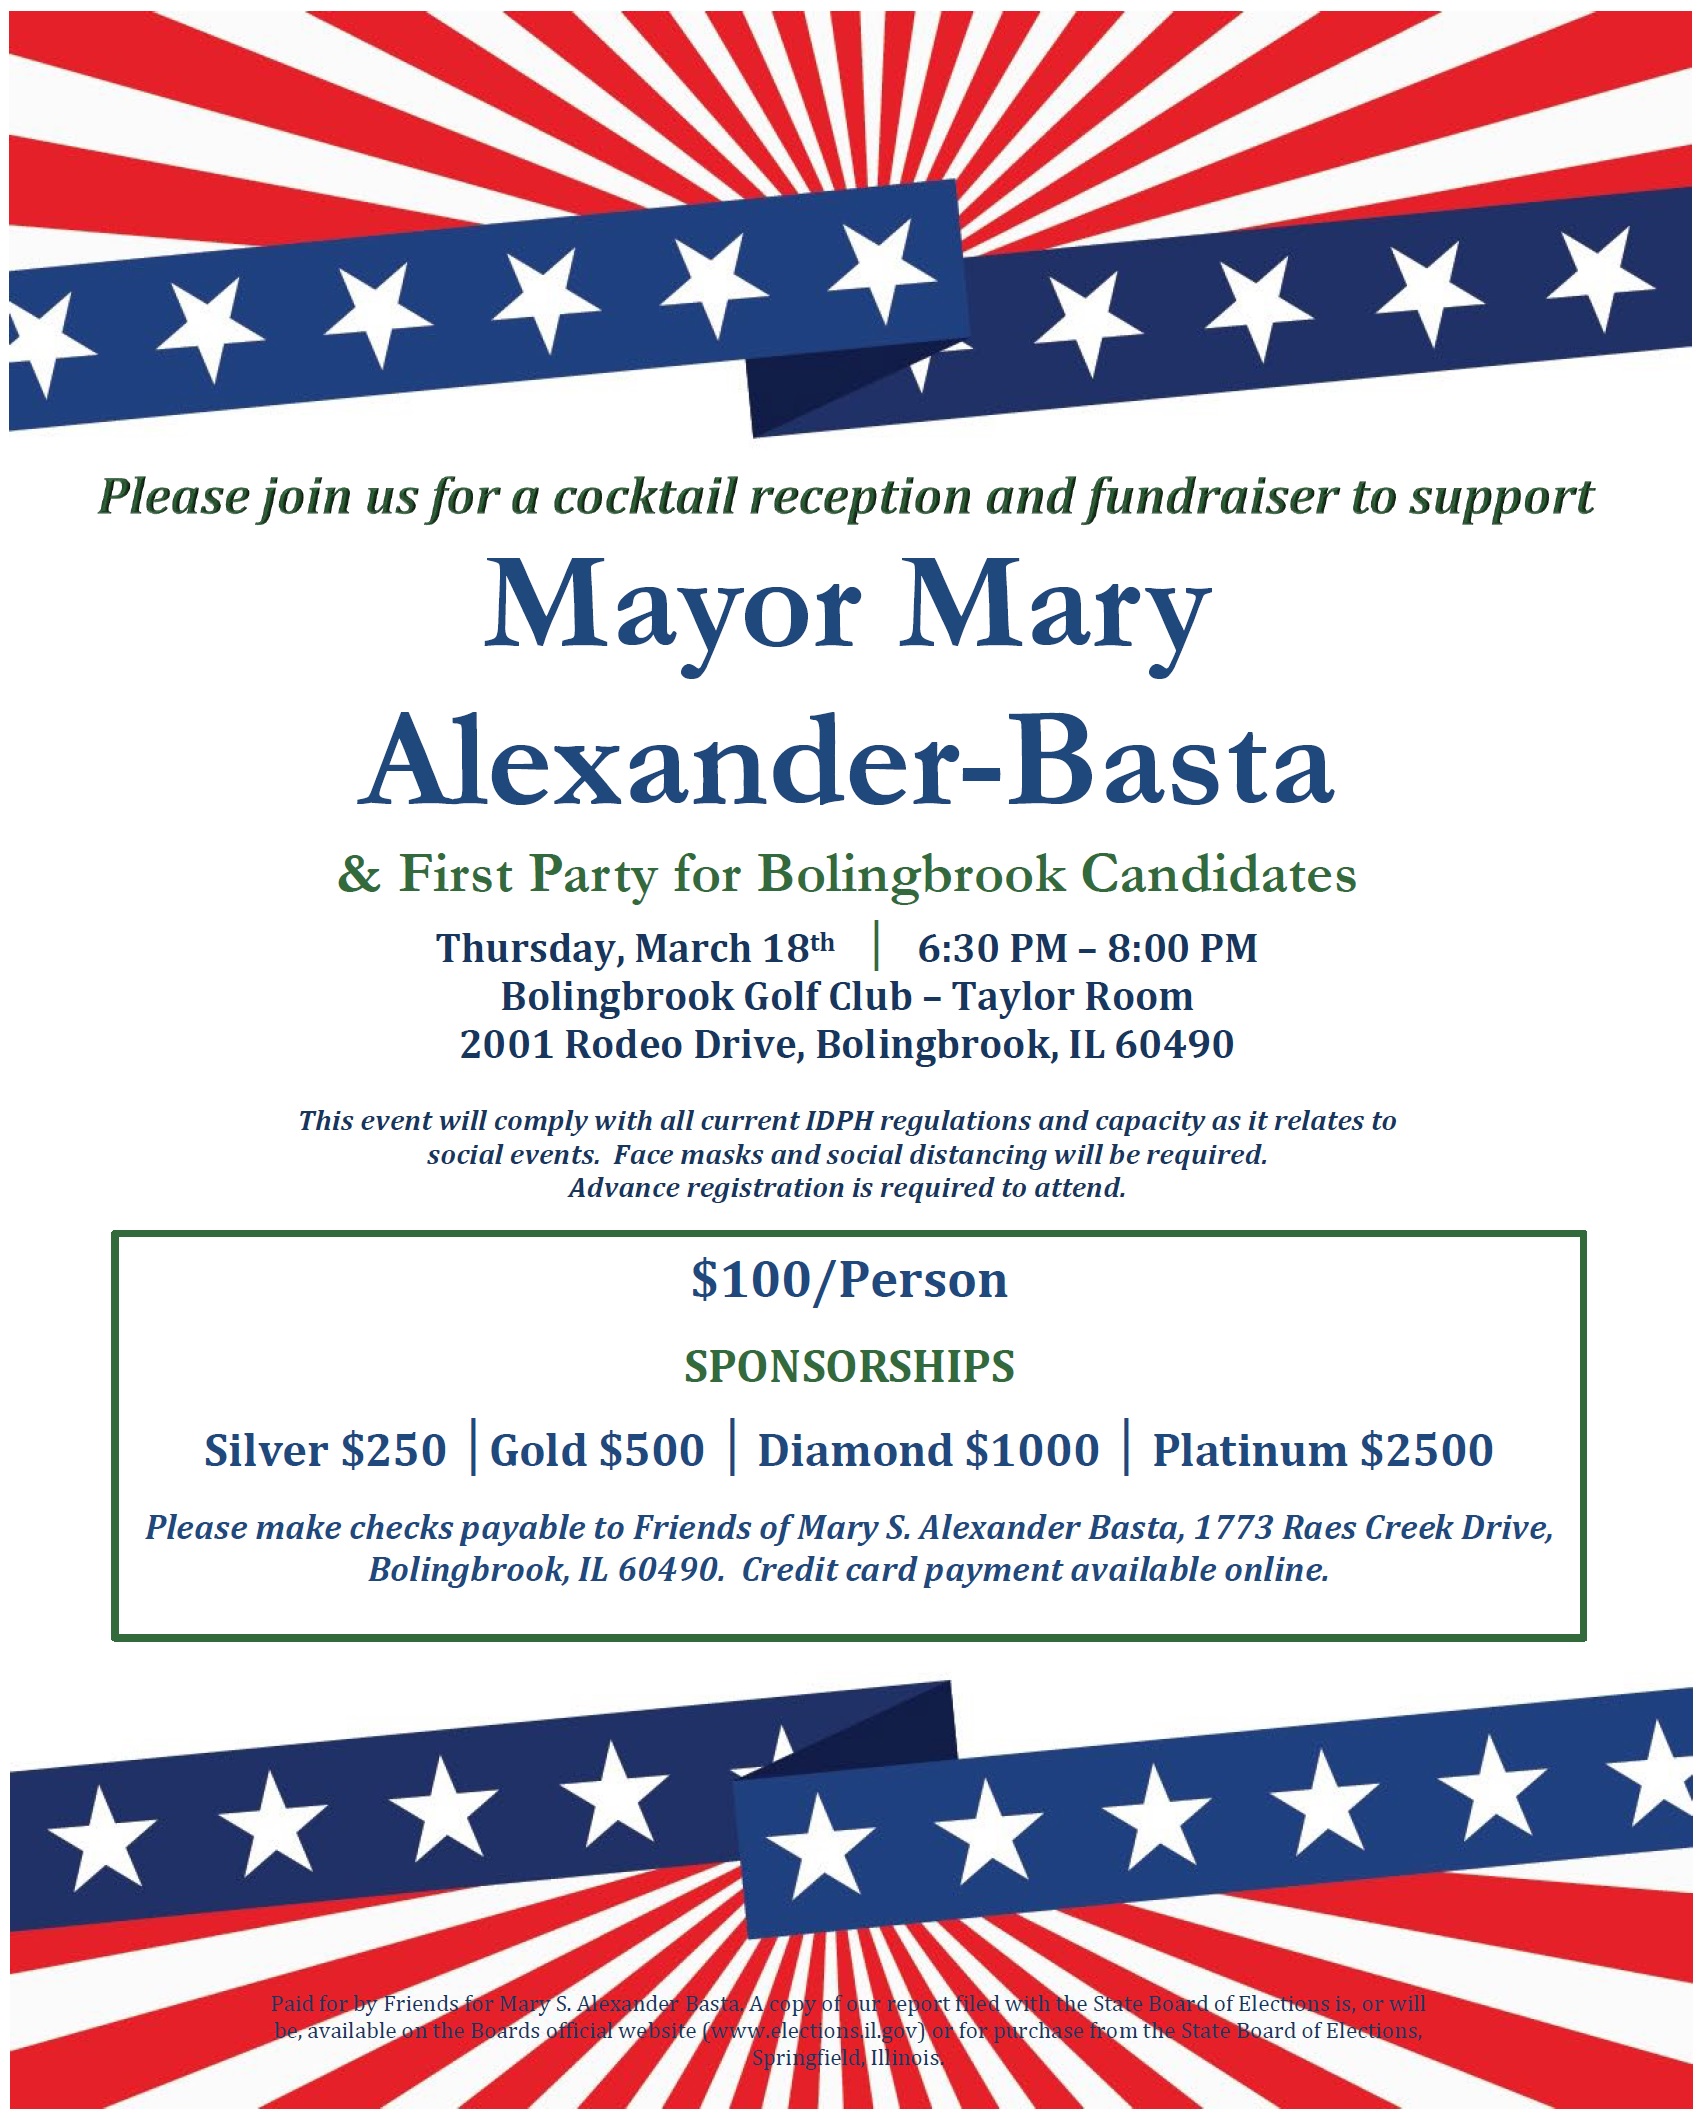 Cocktail Reception and Fundraiser to Support Mayor Mary Alexander-Basta